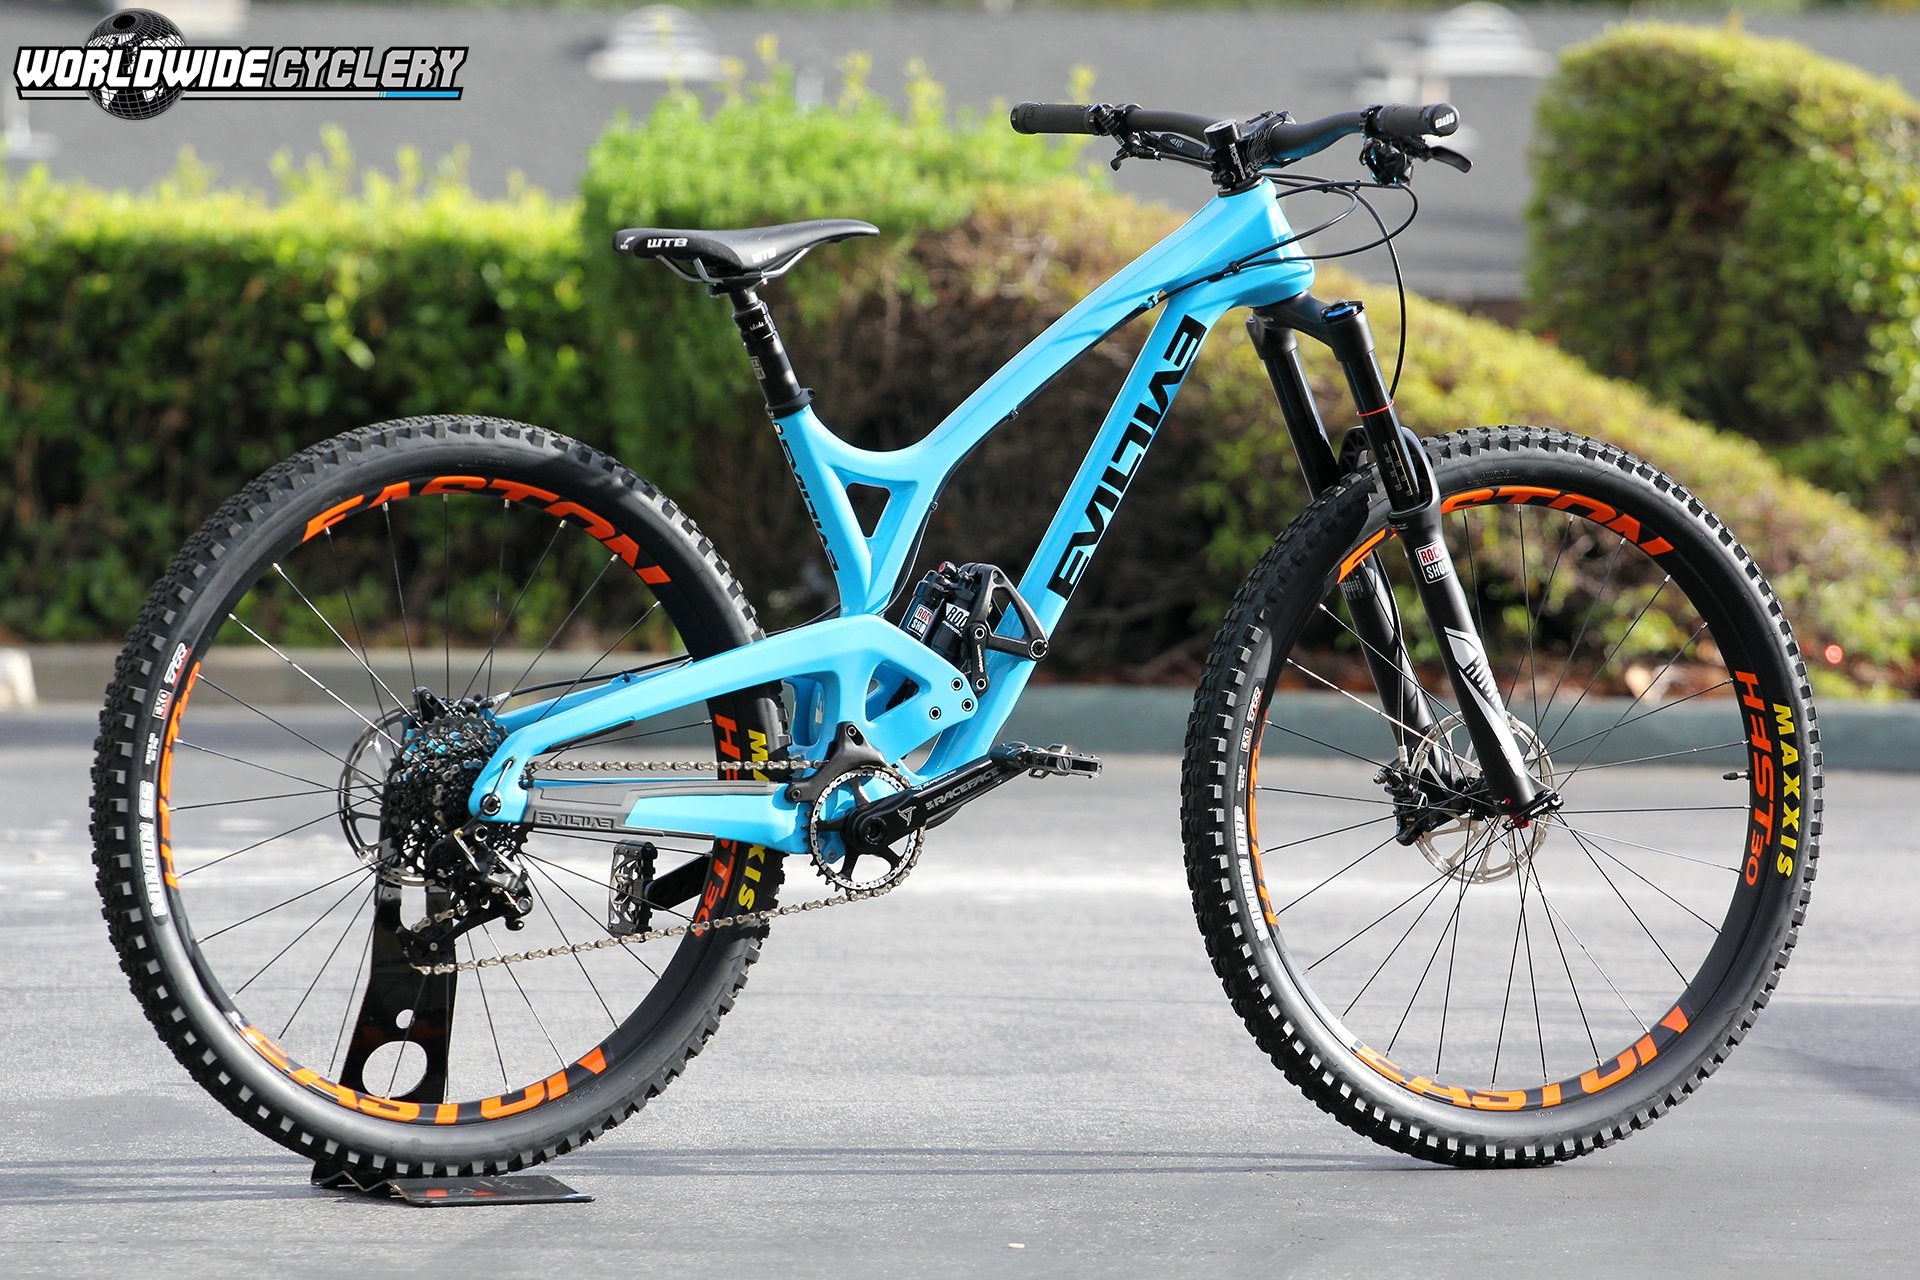 Ultimate Review Guide: Evil The Wreckoning - Worldwide Cyclery